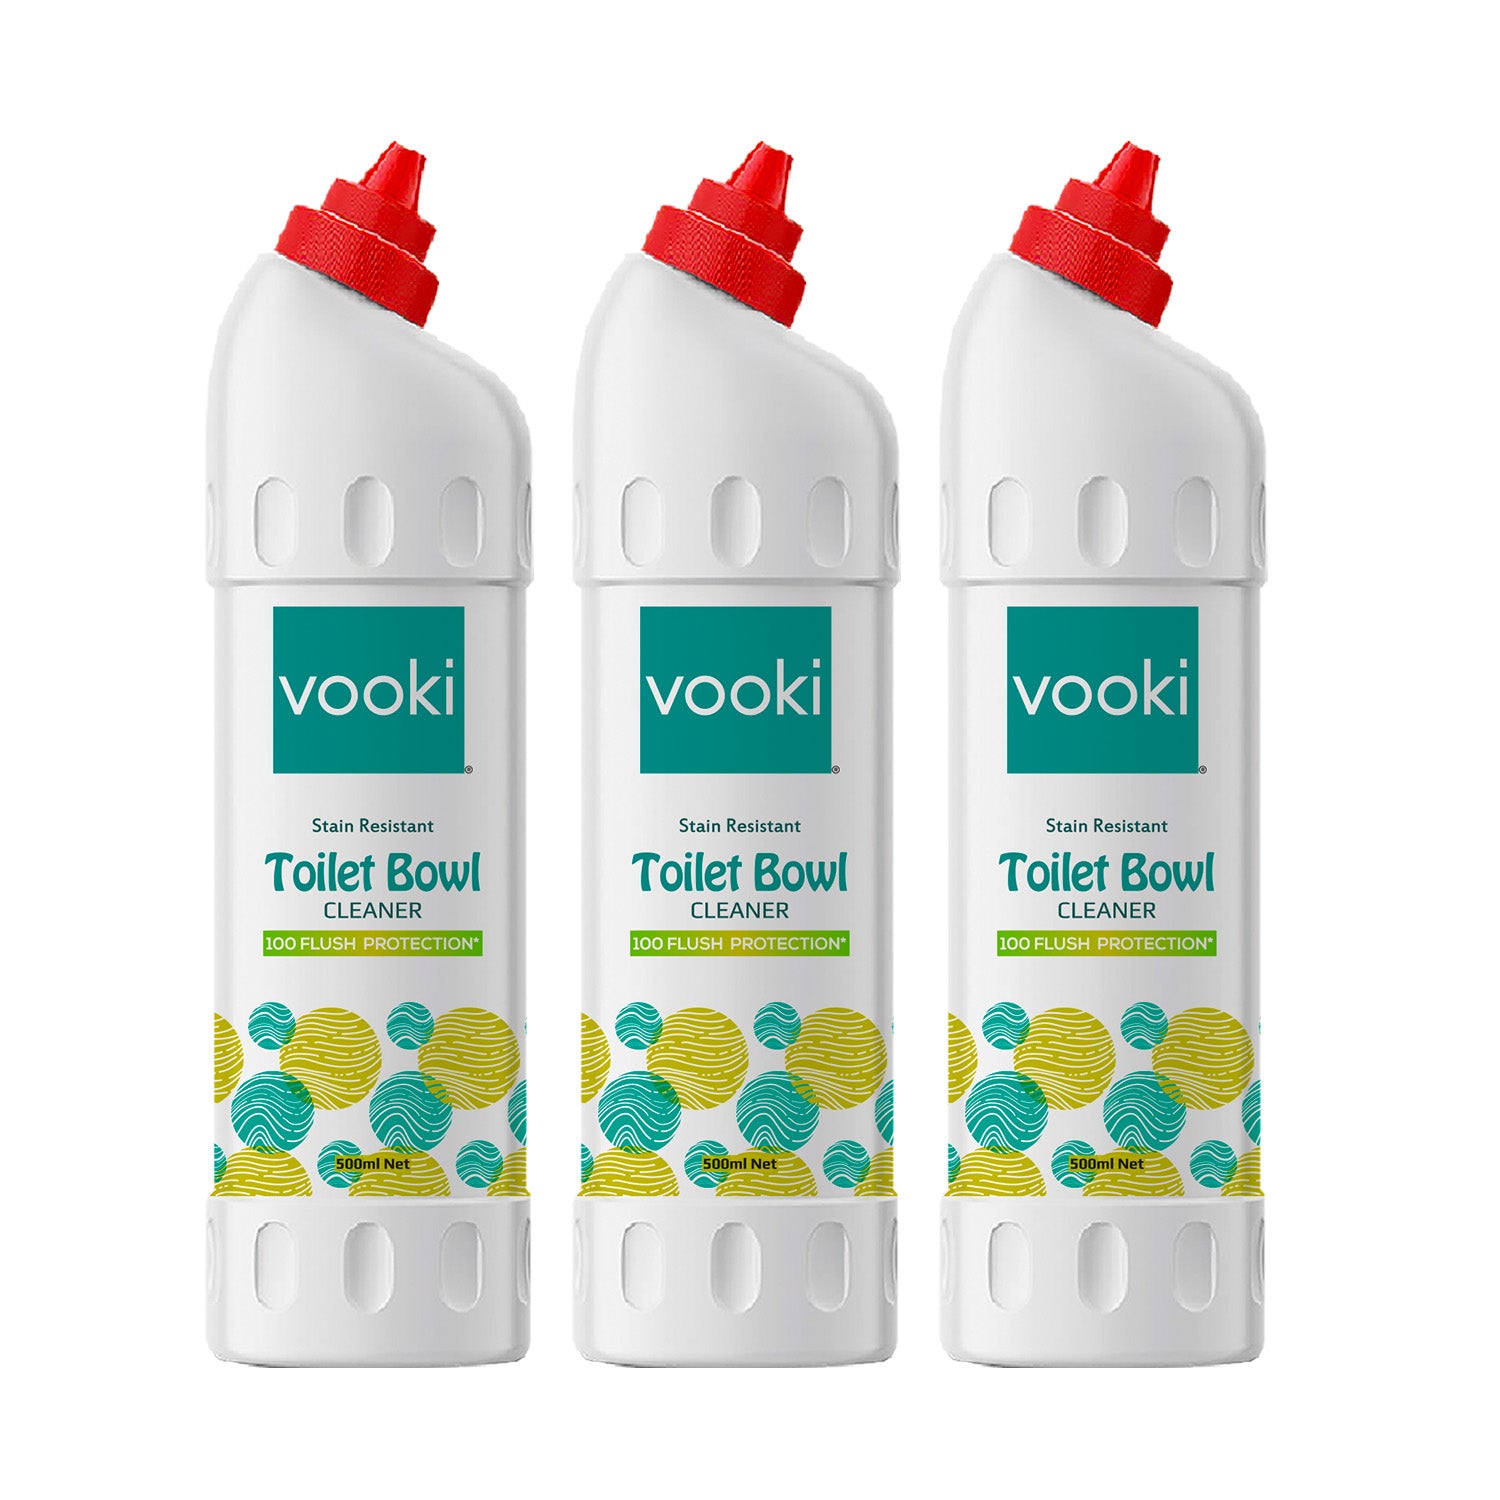 An image of three 500ml toilet cleaner bottles with white background